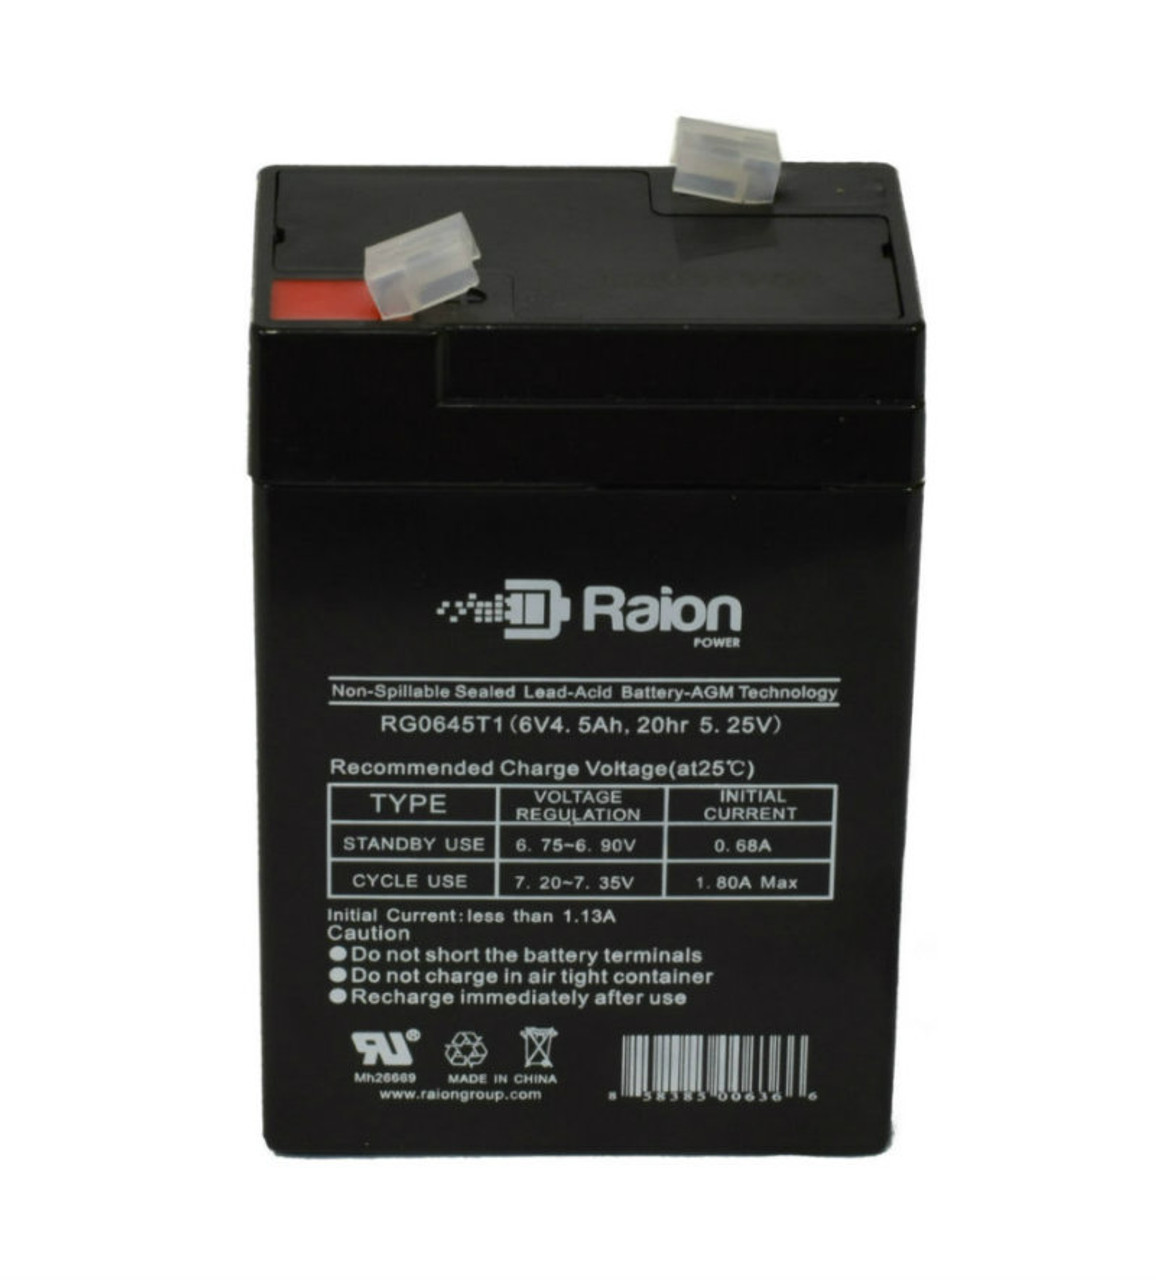 Raion Power RG0645T1 Replacement Battery Cartridge for MCA NP5-6